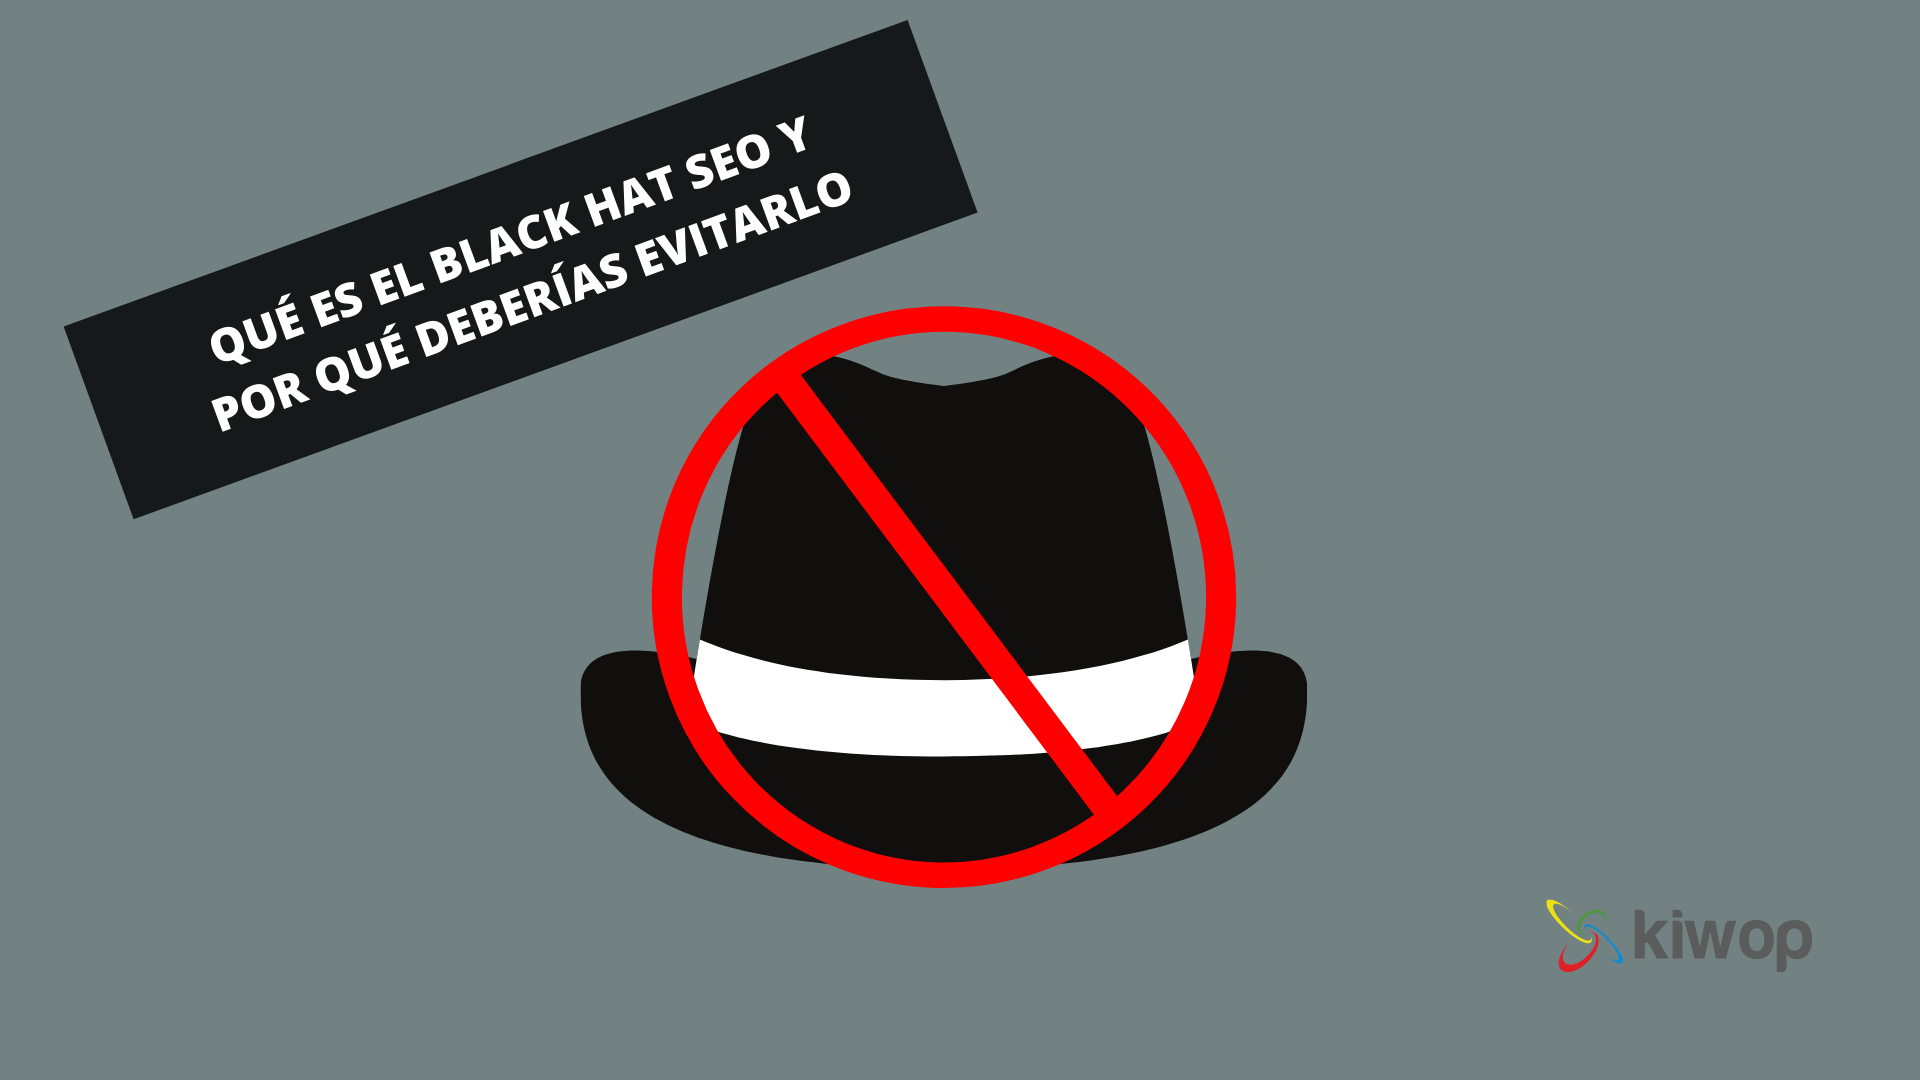 What is Black Hat SEO and why you should avoid it